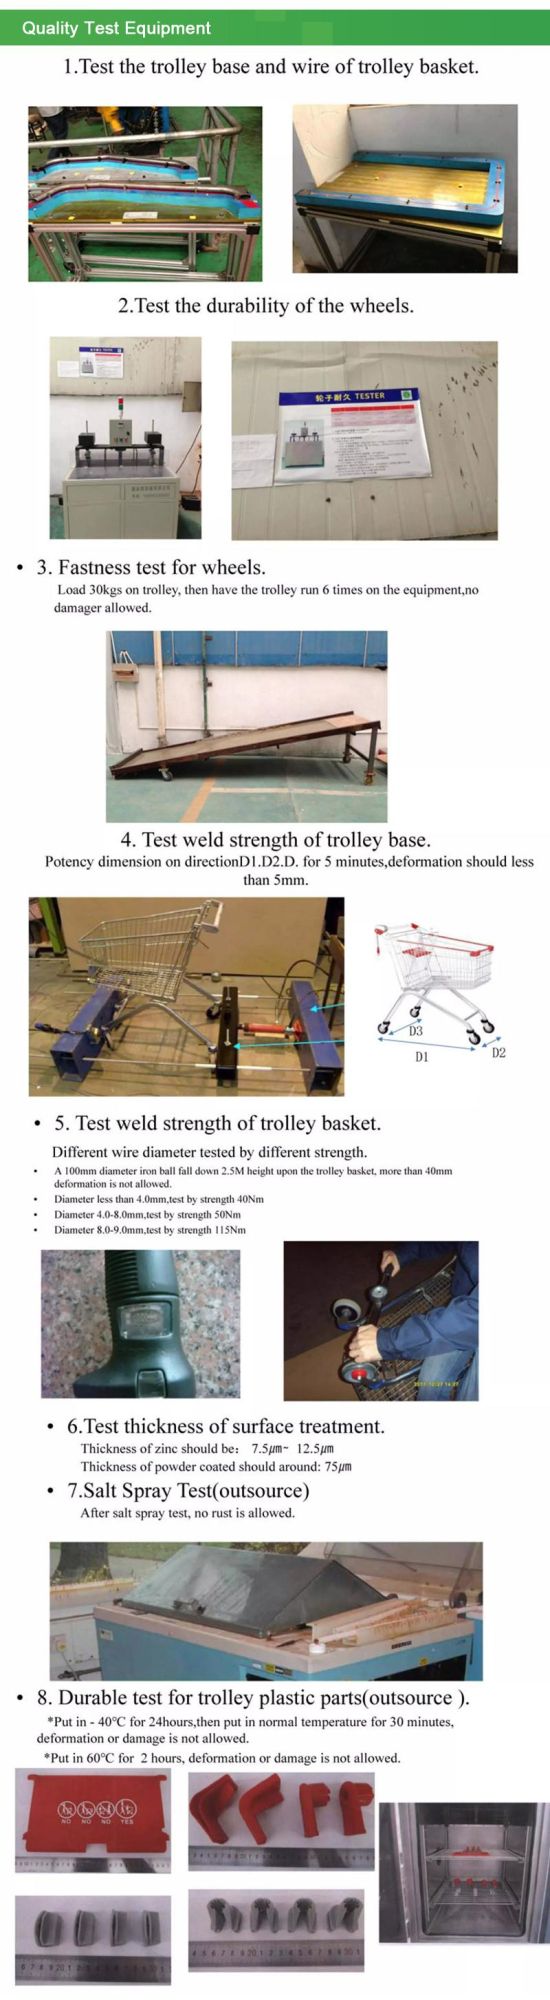 150L German Green Coated Shopping Trolley Manufacturer